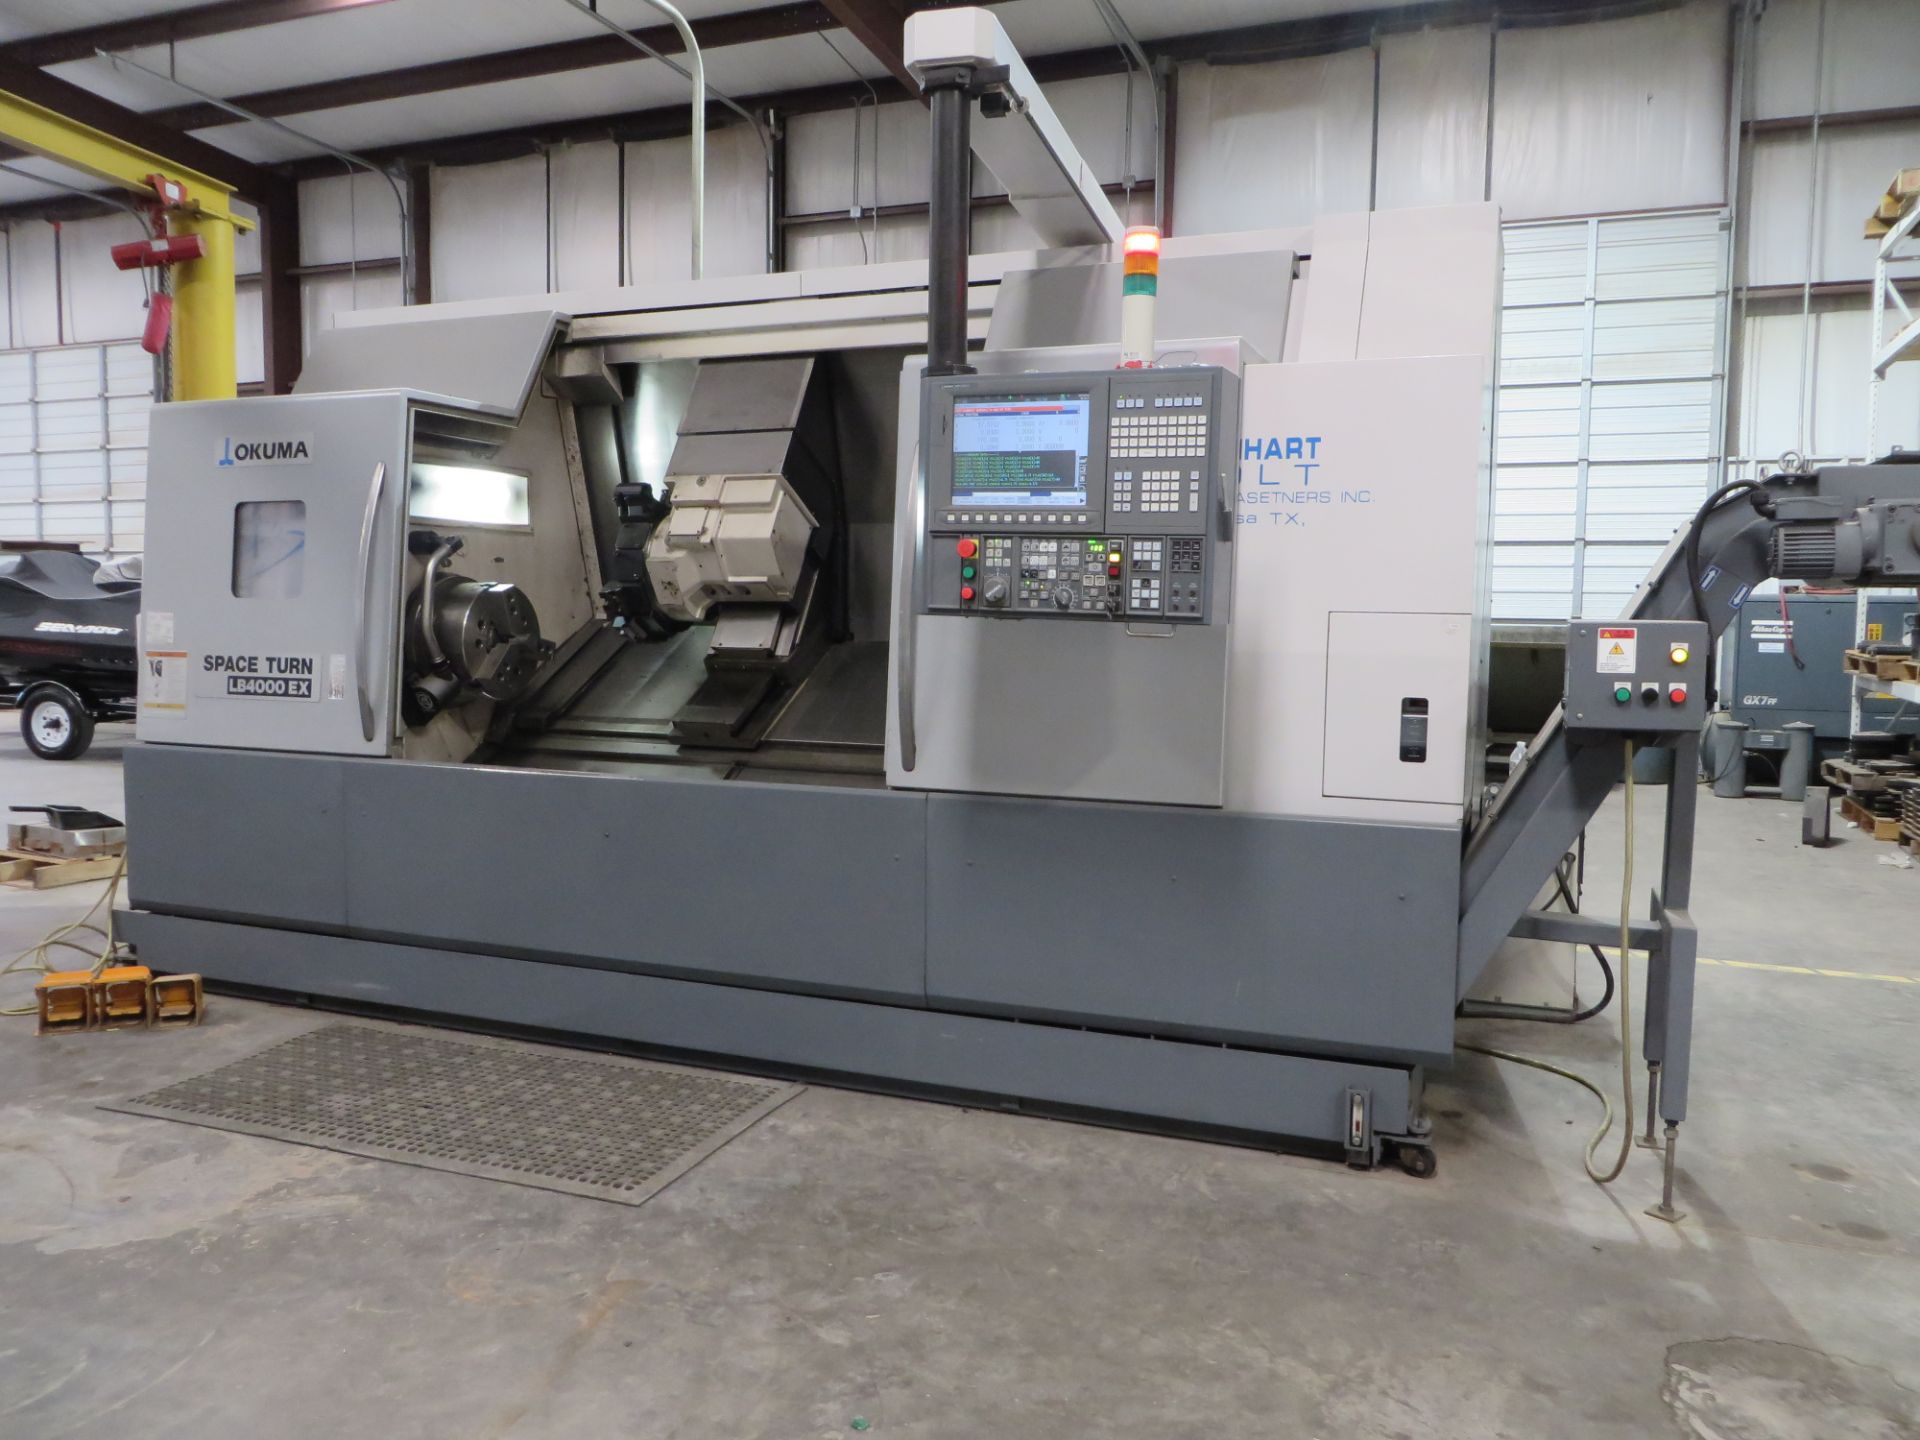 Okuma Space Turn Model LB4000EX - MY C1500 CNC Turning Center with Y-Axis, Milling, C-Axis, 15'' 3-